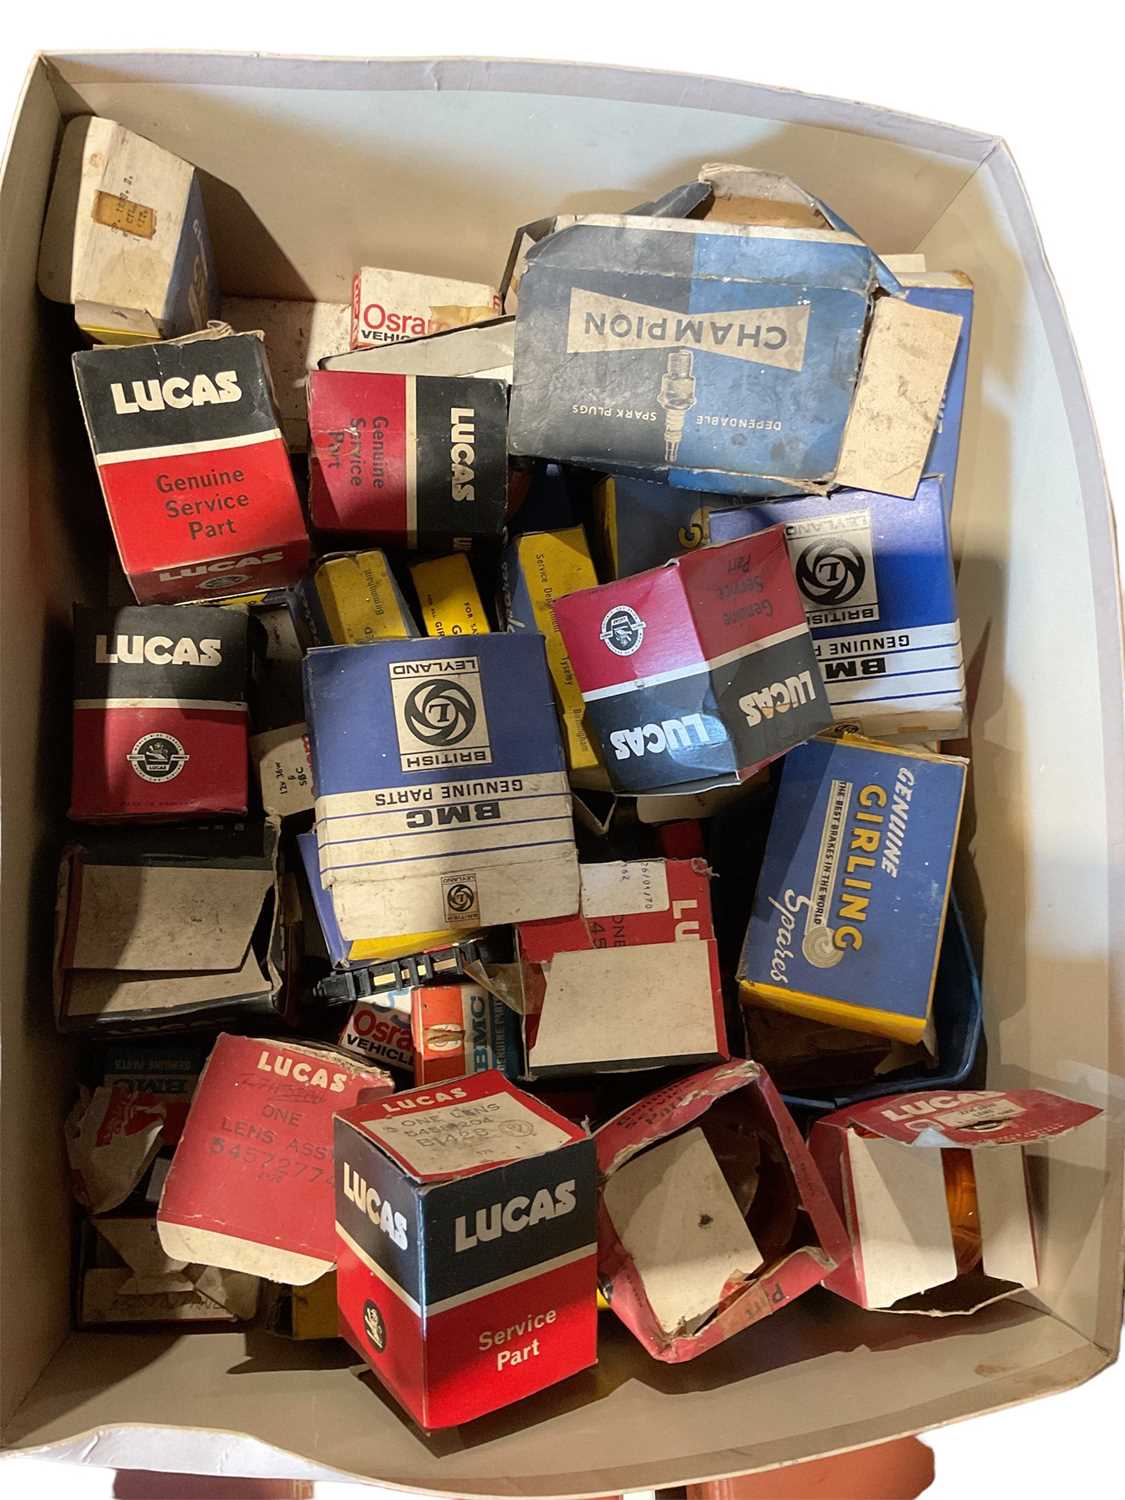 Lot 113 - Collection of various new old stock car fittings, mainly light lenses and units, in Lucas, Girling and BL / BMC branded boxes (1 box).